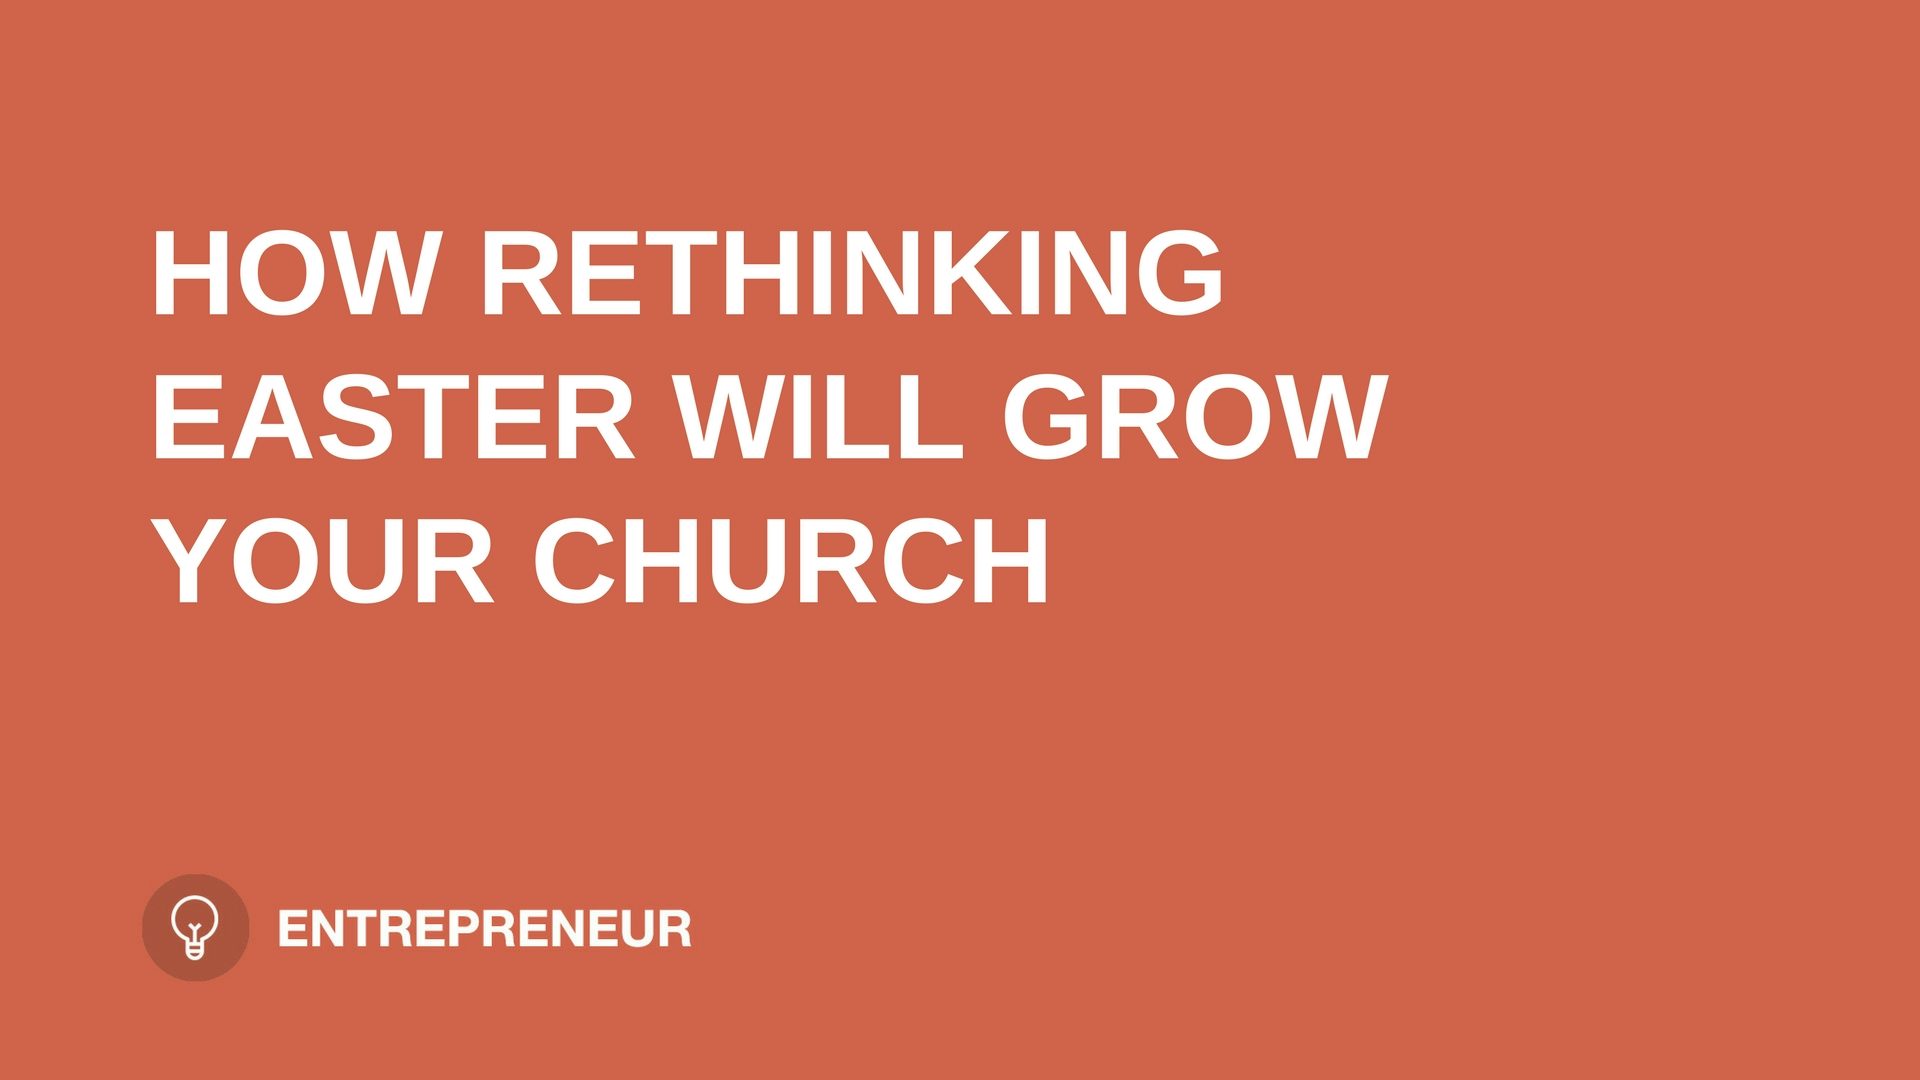 text "HOW RETHINKING EASTER WILL GROW YOUR CHURCH" on orange background leaders.church